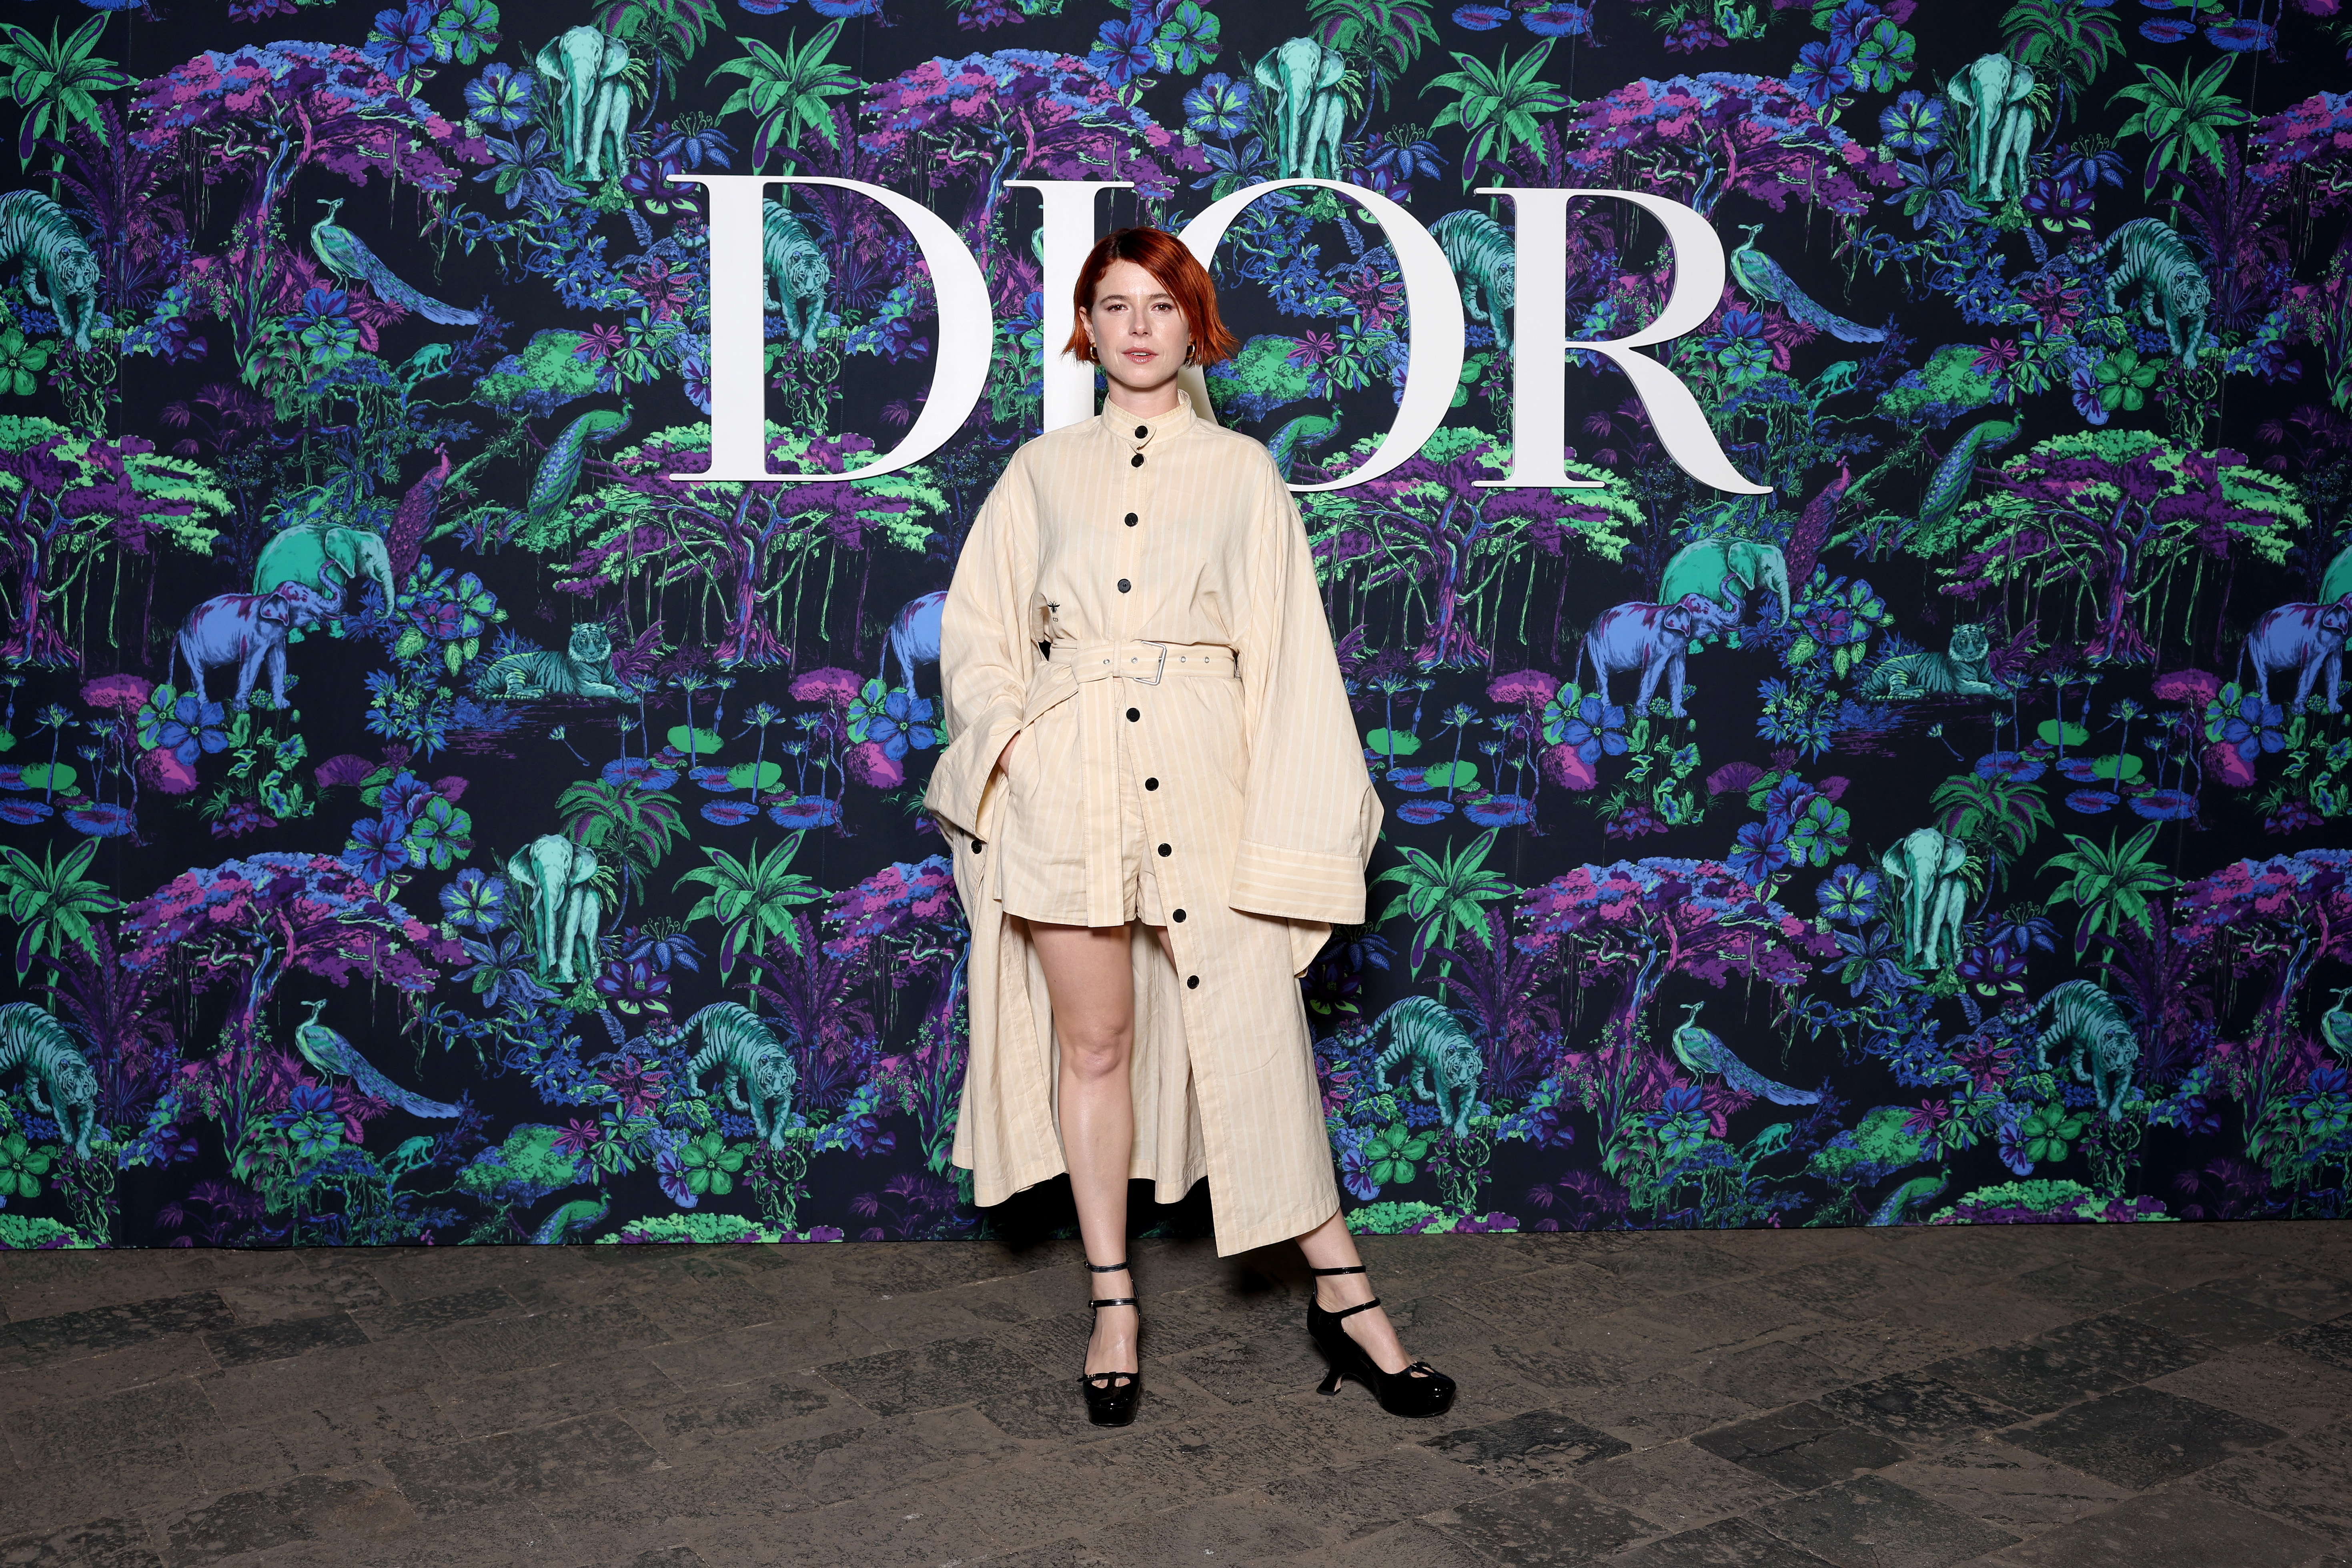 Jessie Buckley attends the Christian Dior Womenswear Fall 2023 show at the Gateway of India monument, on March 30, 2023, in Mumbai, India.  | Source: Getty Images